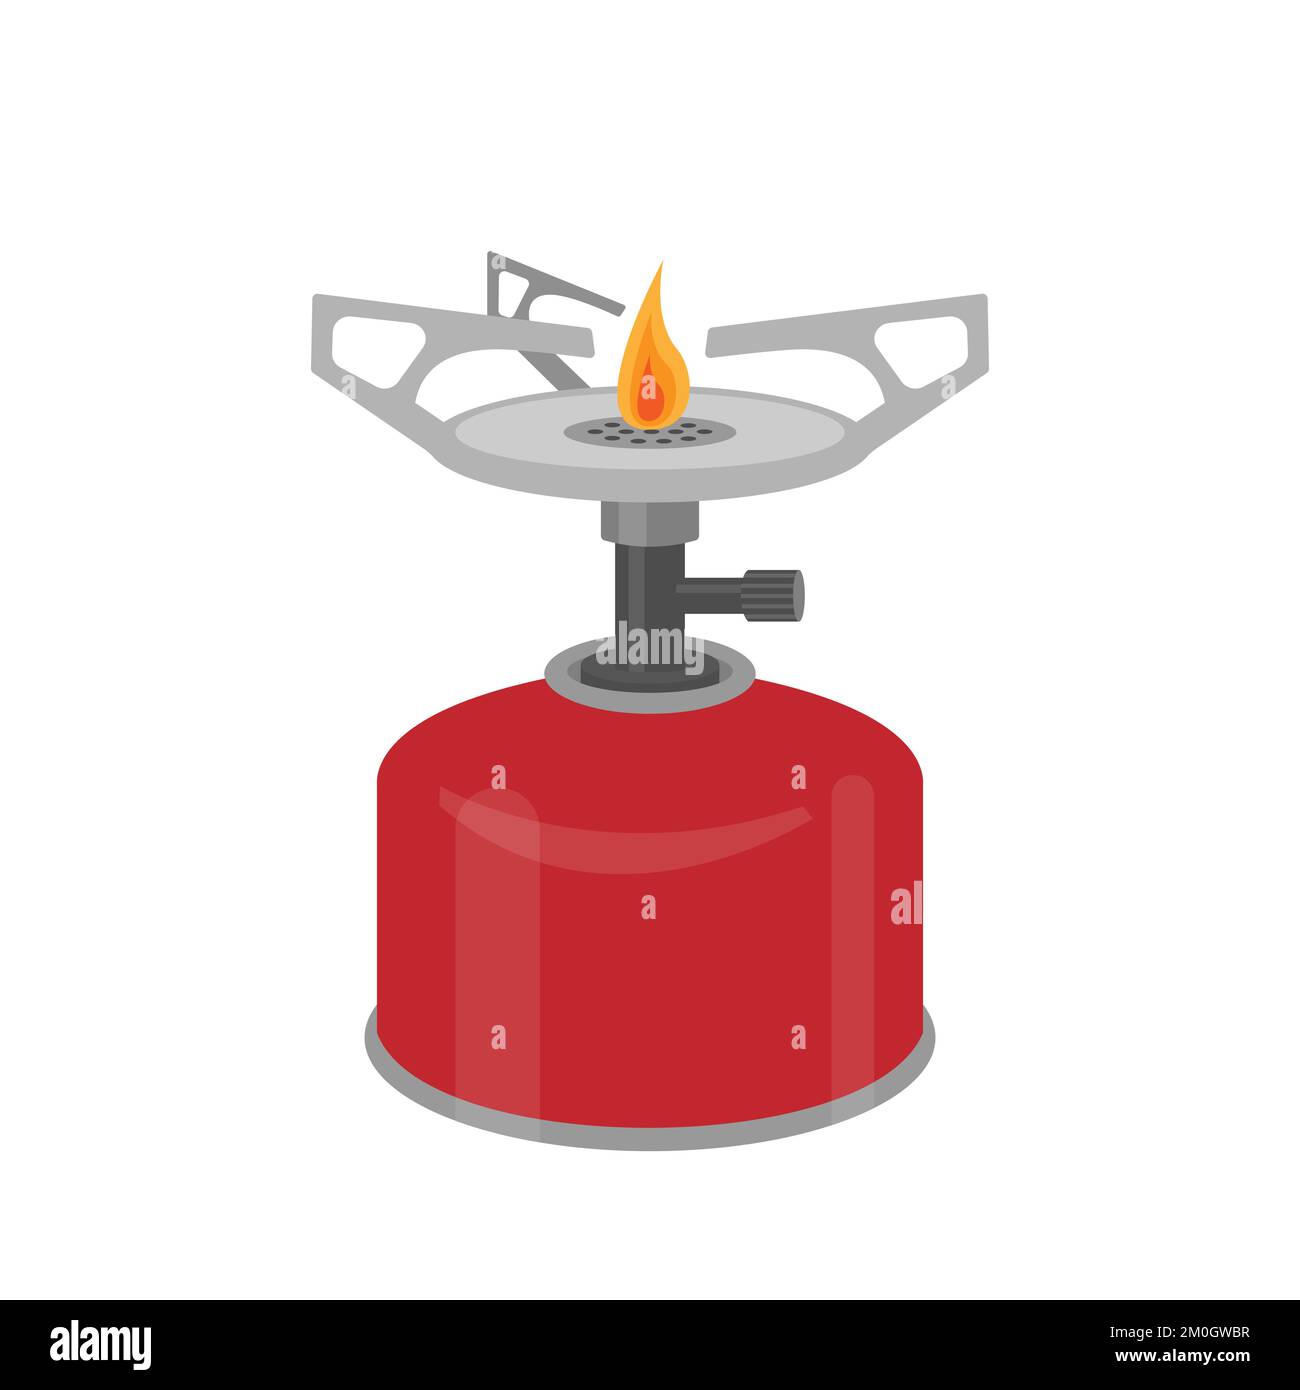 Camping Gas stove with butane gas canister Stock Photo - Alamy